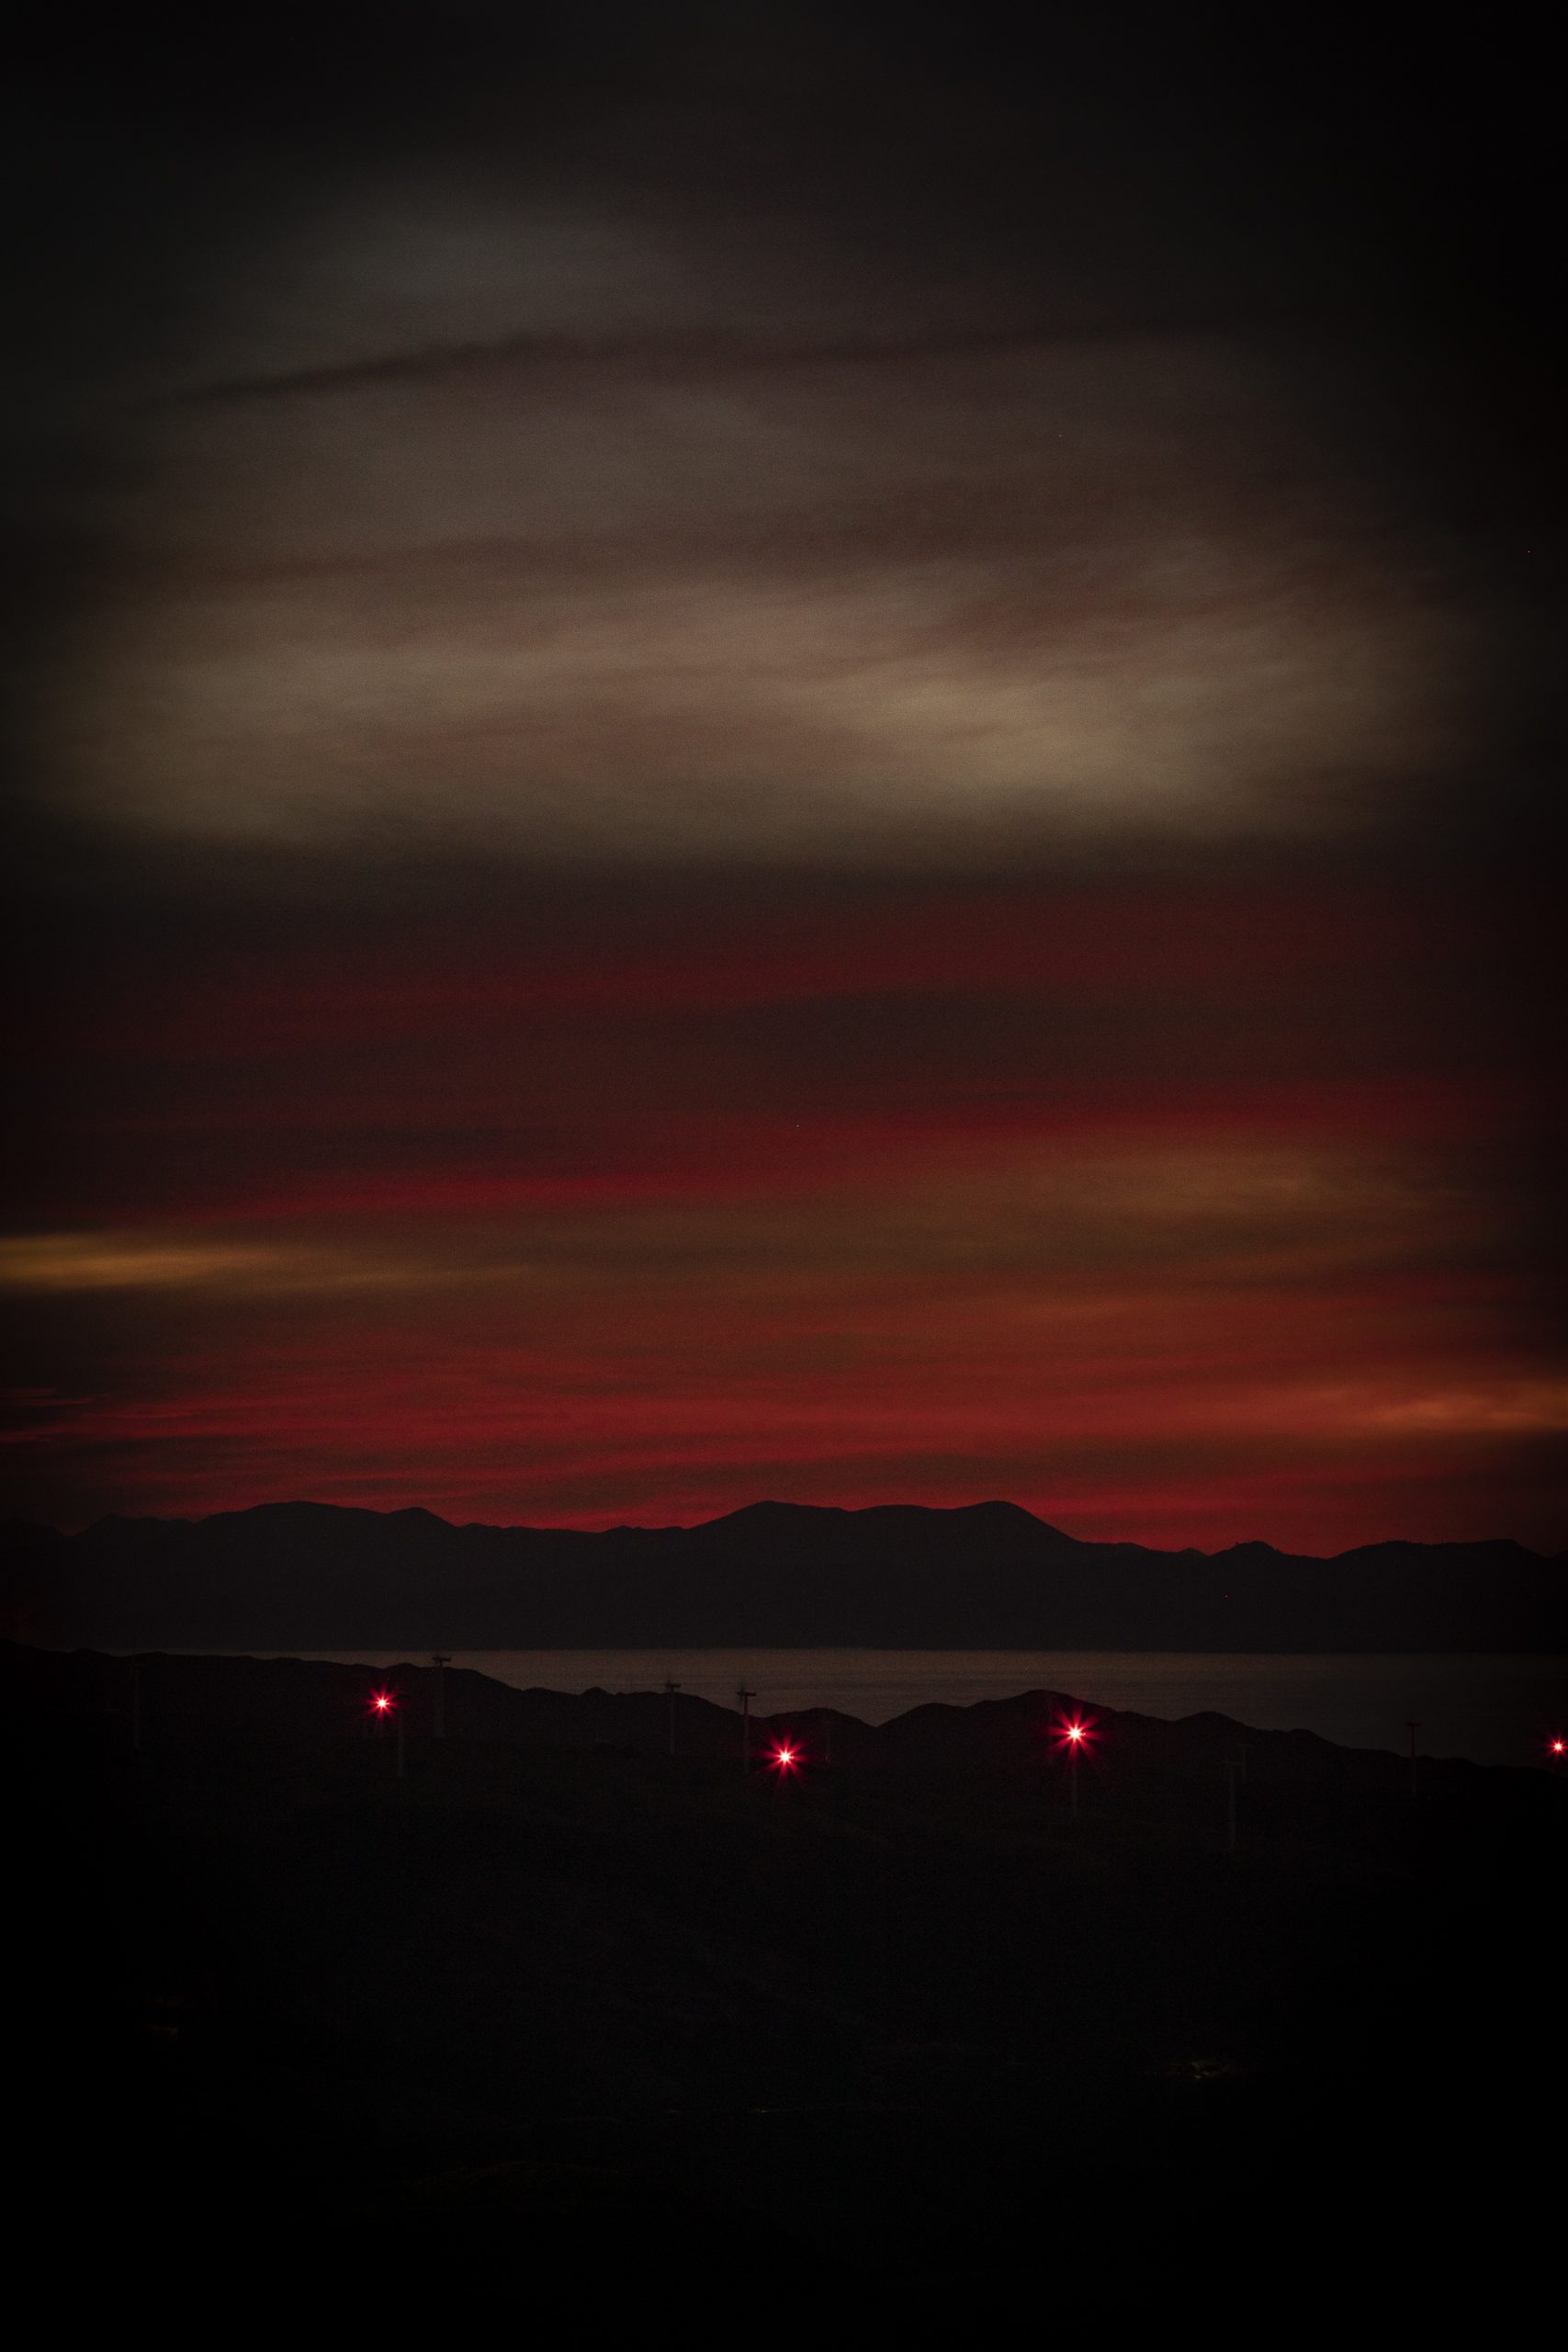 The view west from Kaukau at night showing South Island and the wind turbine lights.